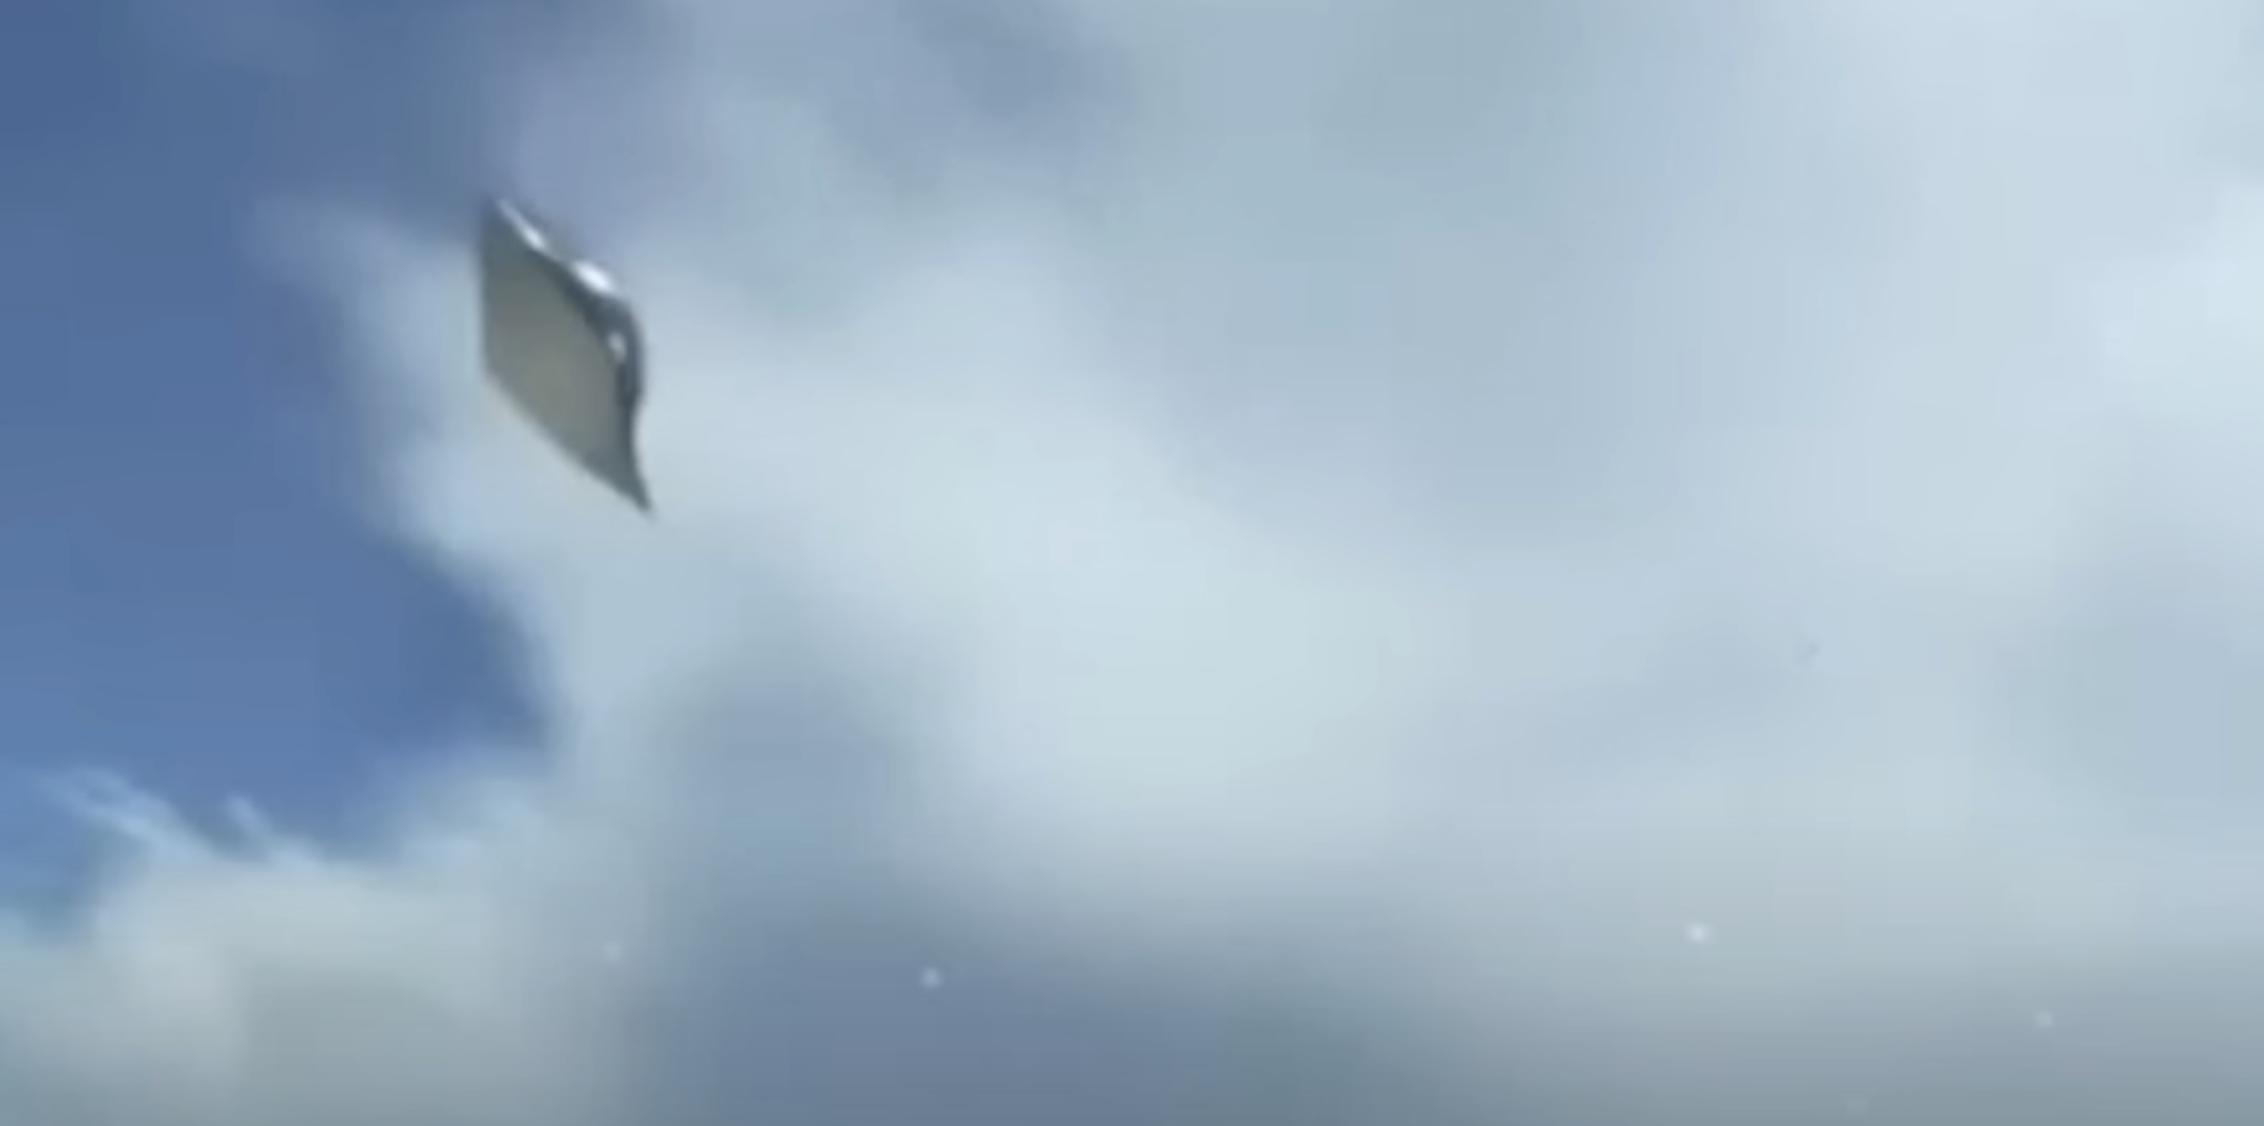 Screenshot from the YouTube video showing the UFO.